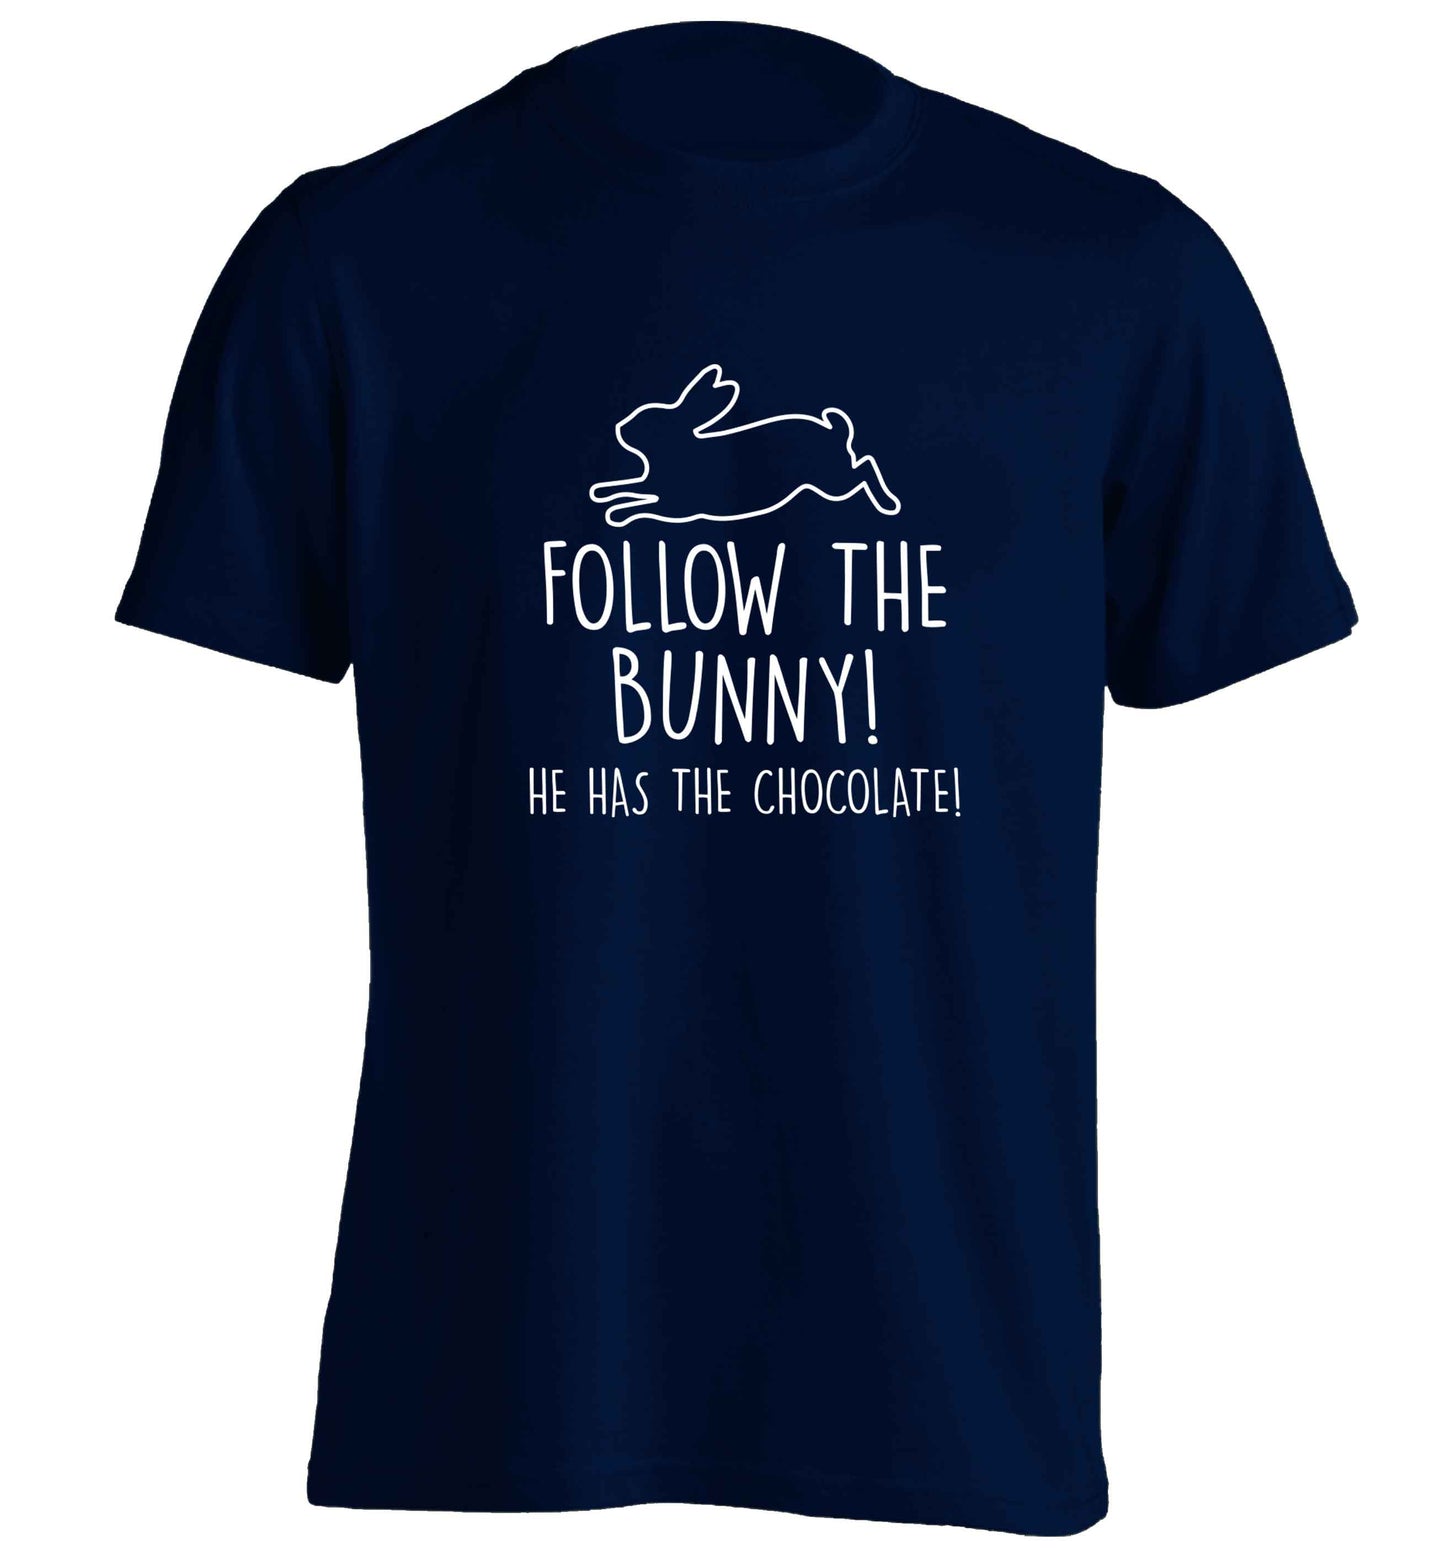 Follow the bunny! He has the chocolate adults unisex navy Tshirt 2XL